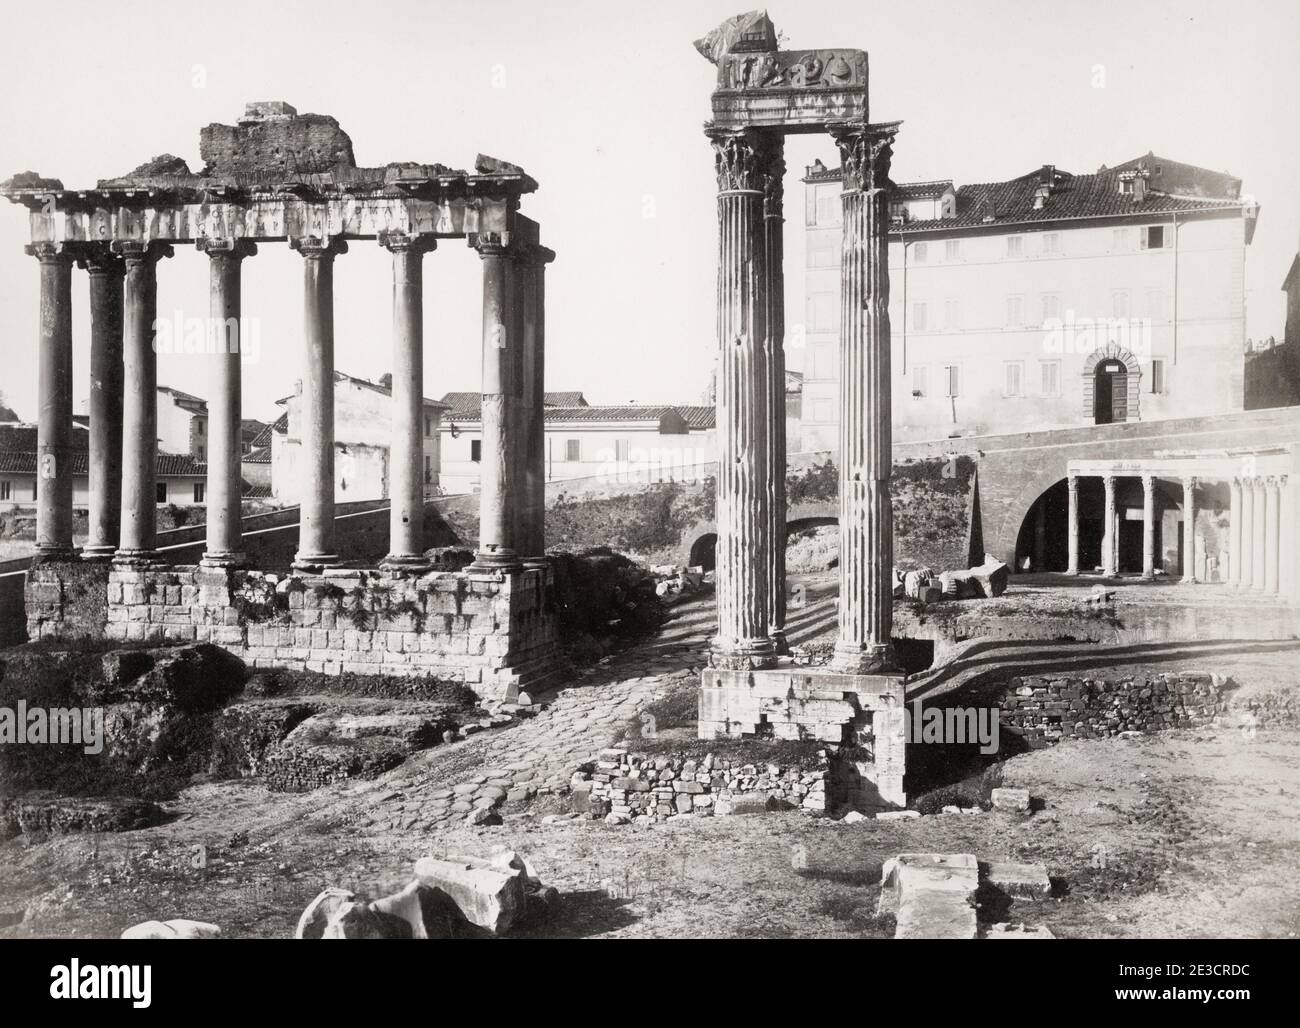 Vintage 19th century photograph: The Temple of Saturn was an ancient ...